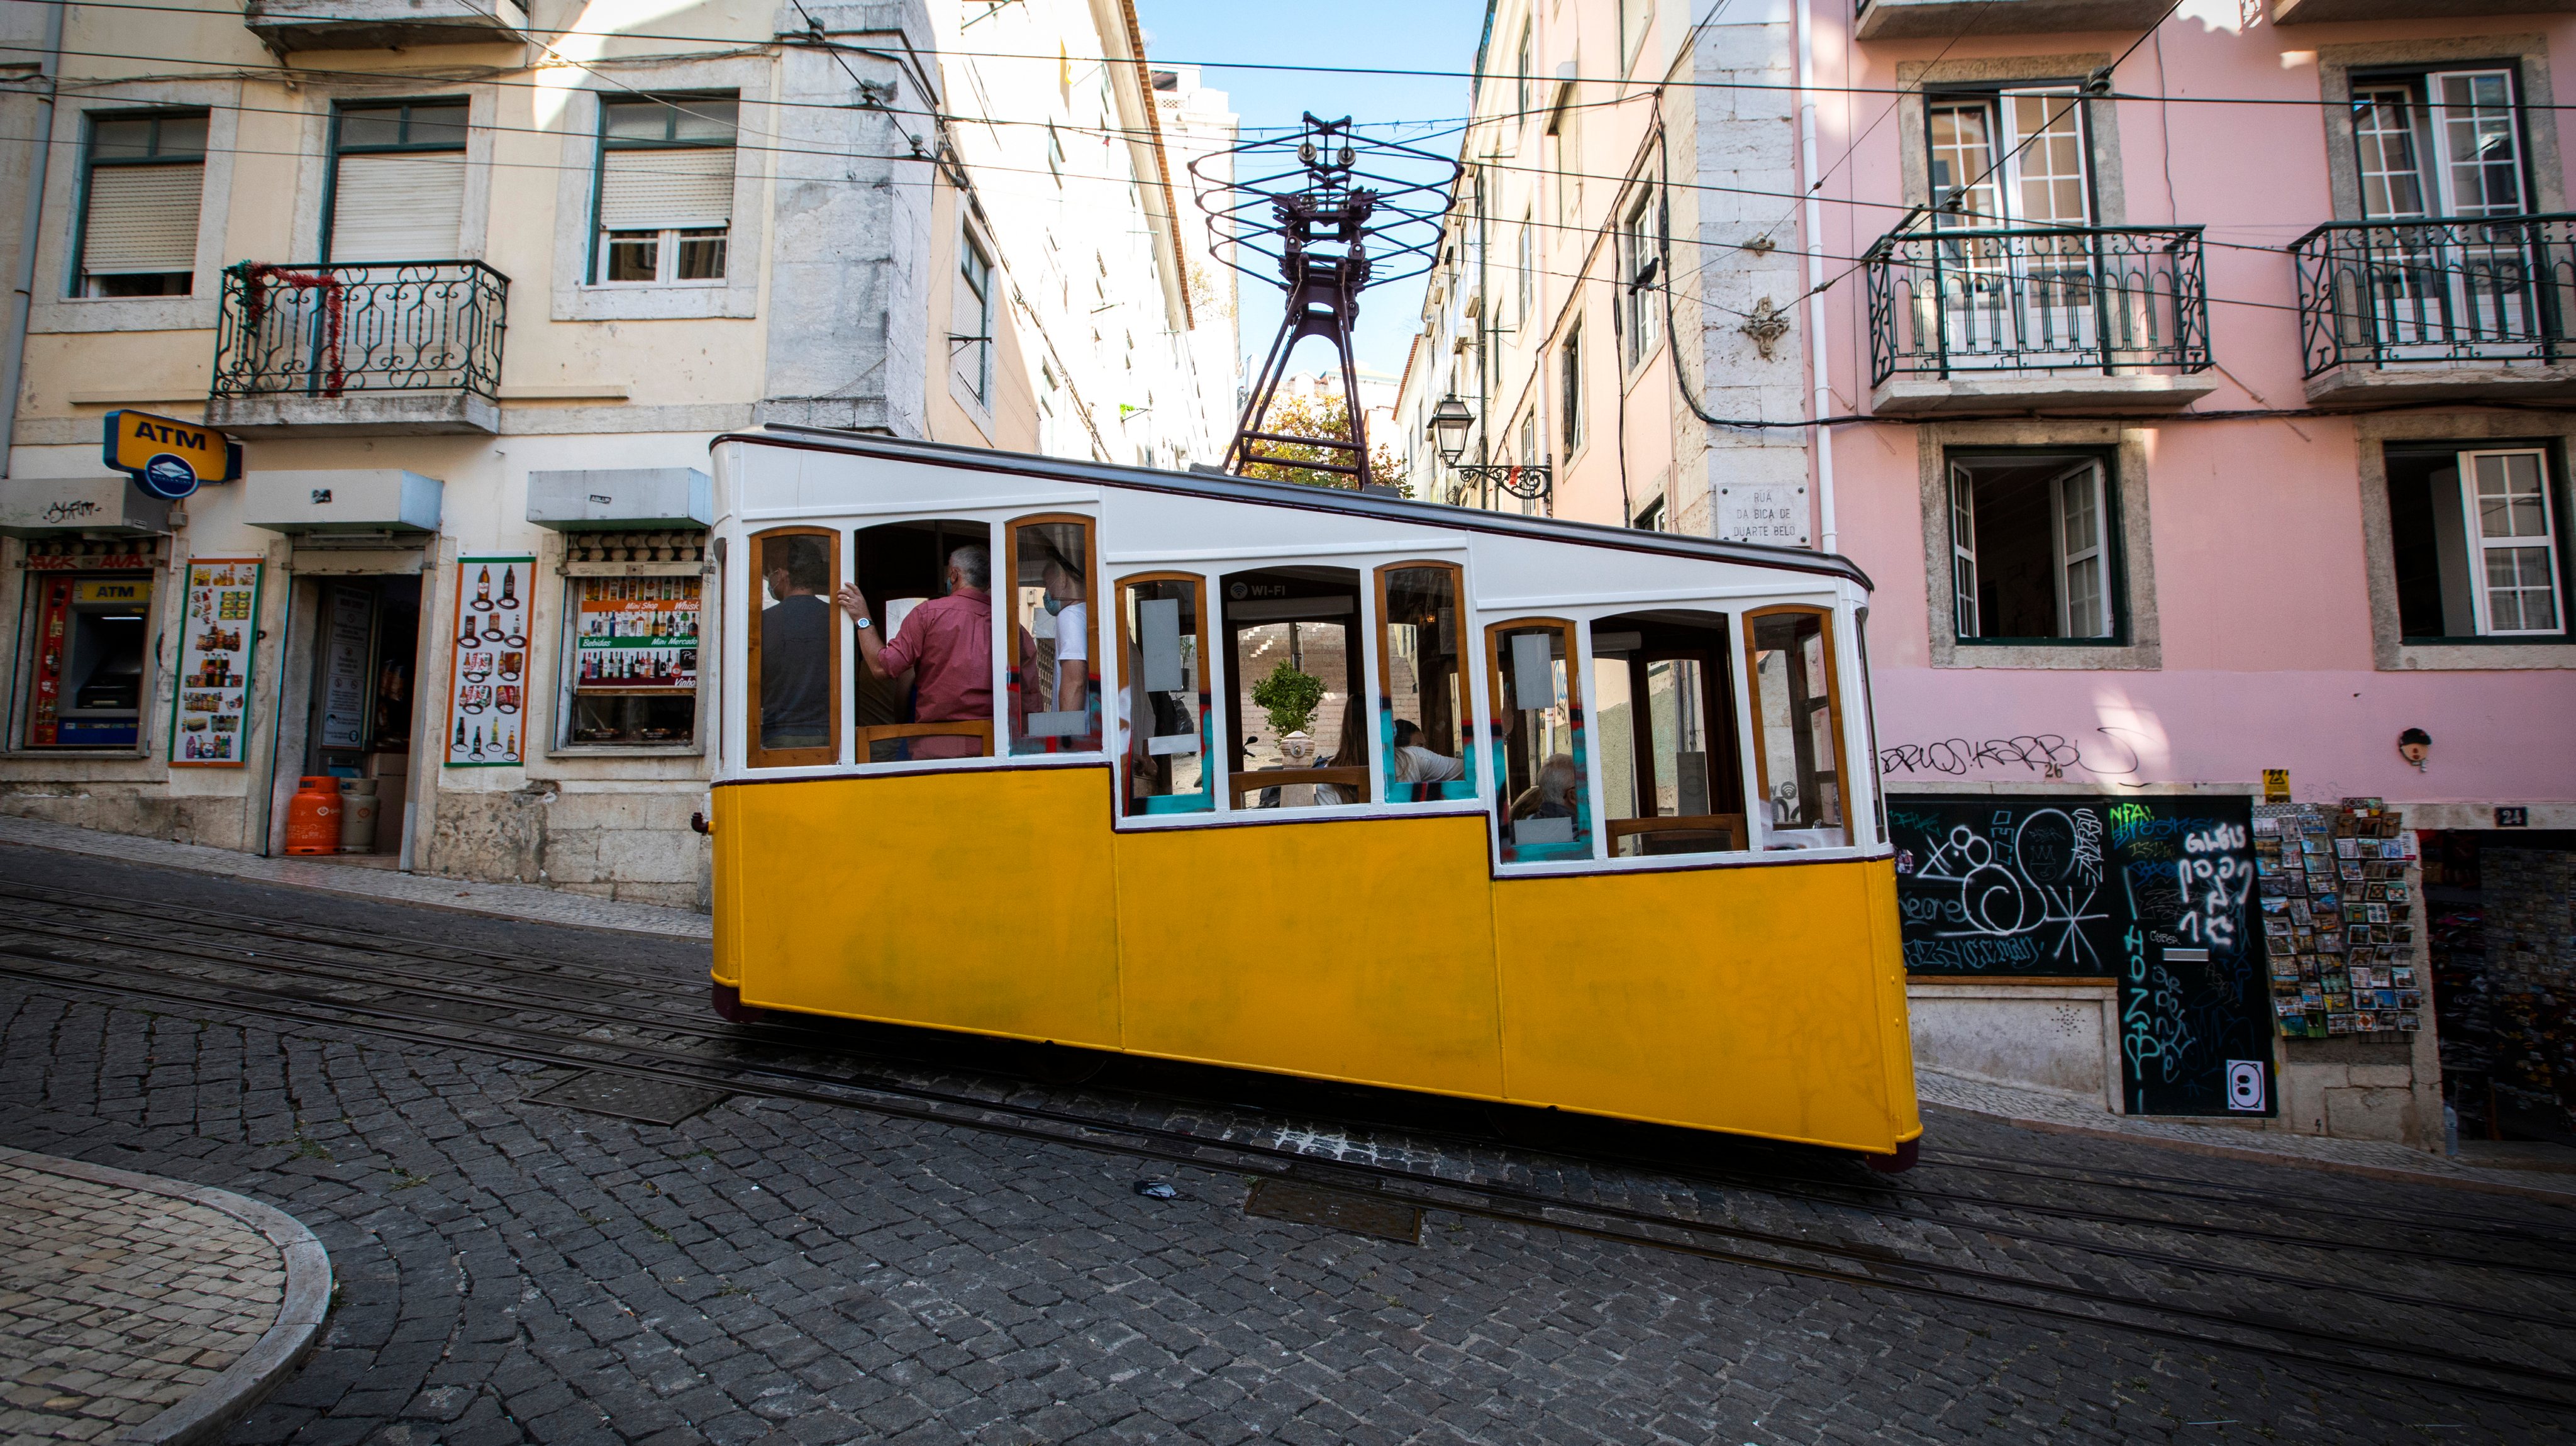 The Bica funicular is seen on the way up to &quot;Largo do